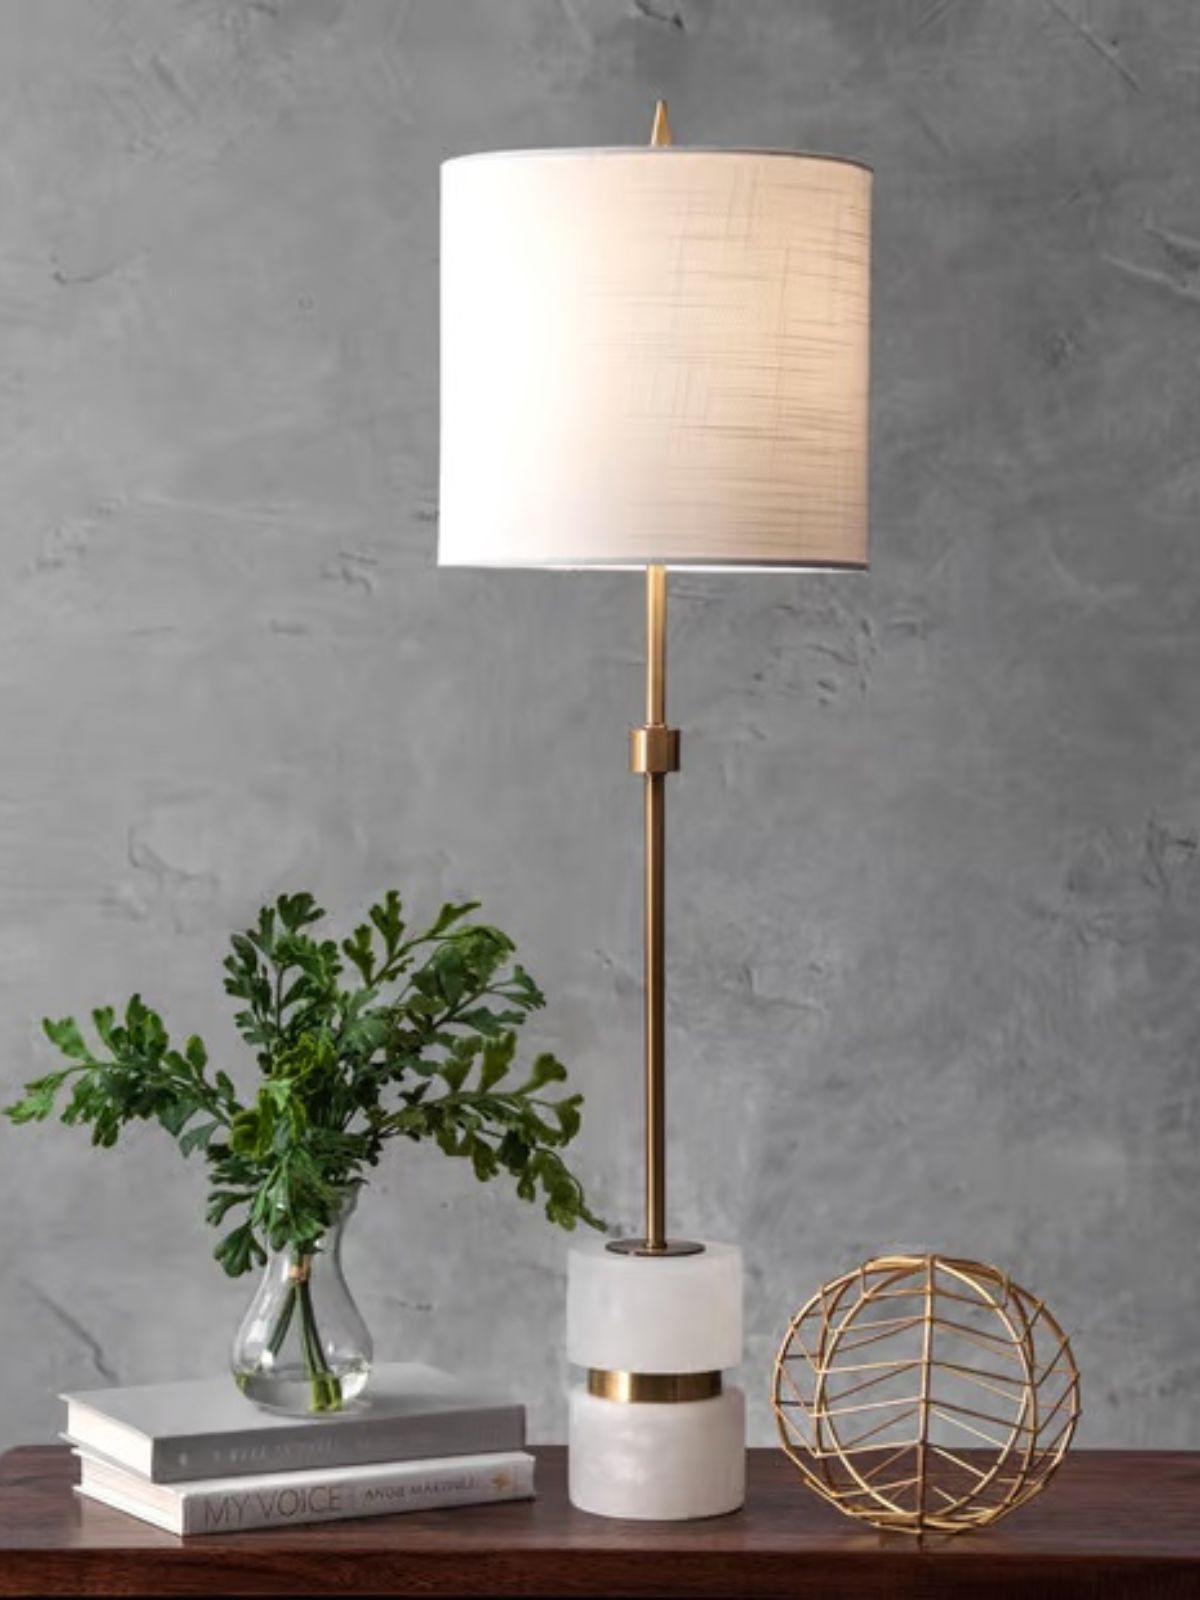 Alabaster Table Lamp with Linen Shade and Brass Pole.